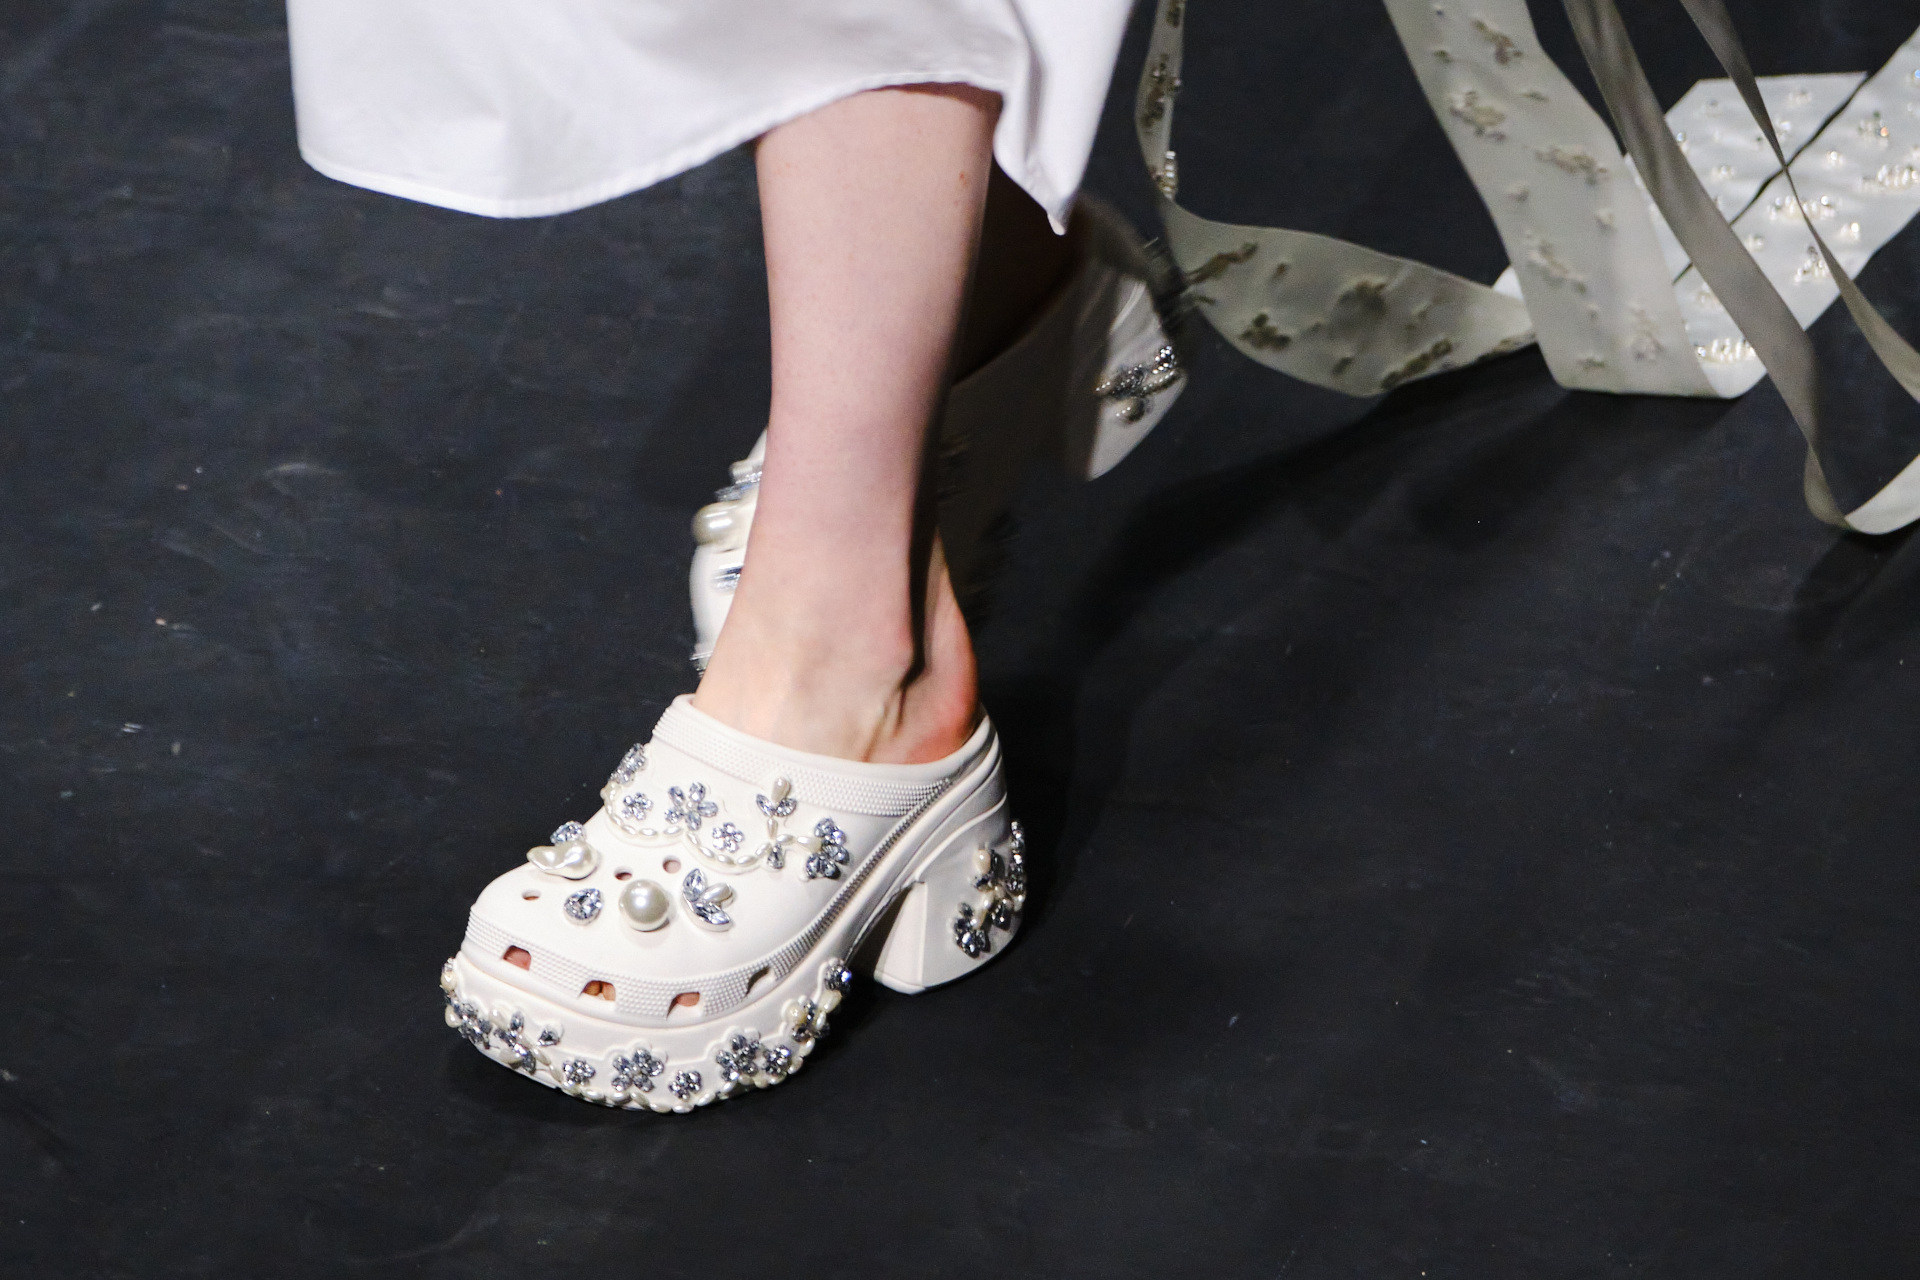 Why Is Everyone Talking About The New Simone Rocha x Crocs Collab?